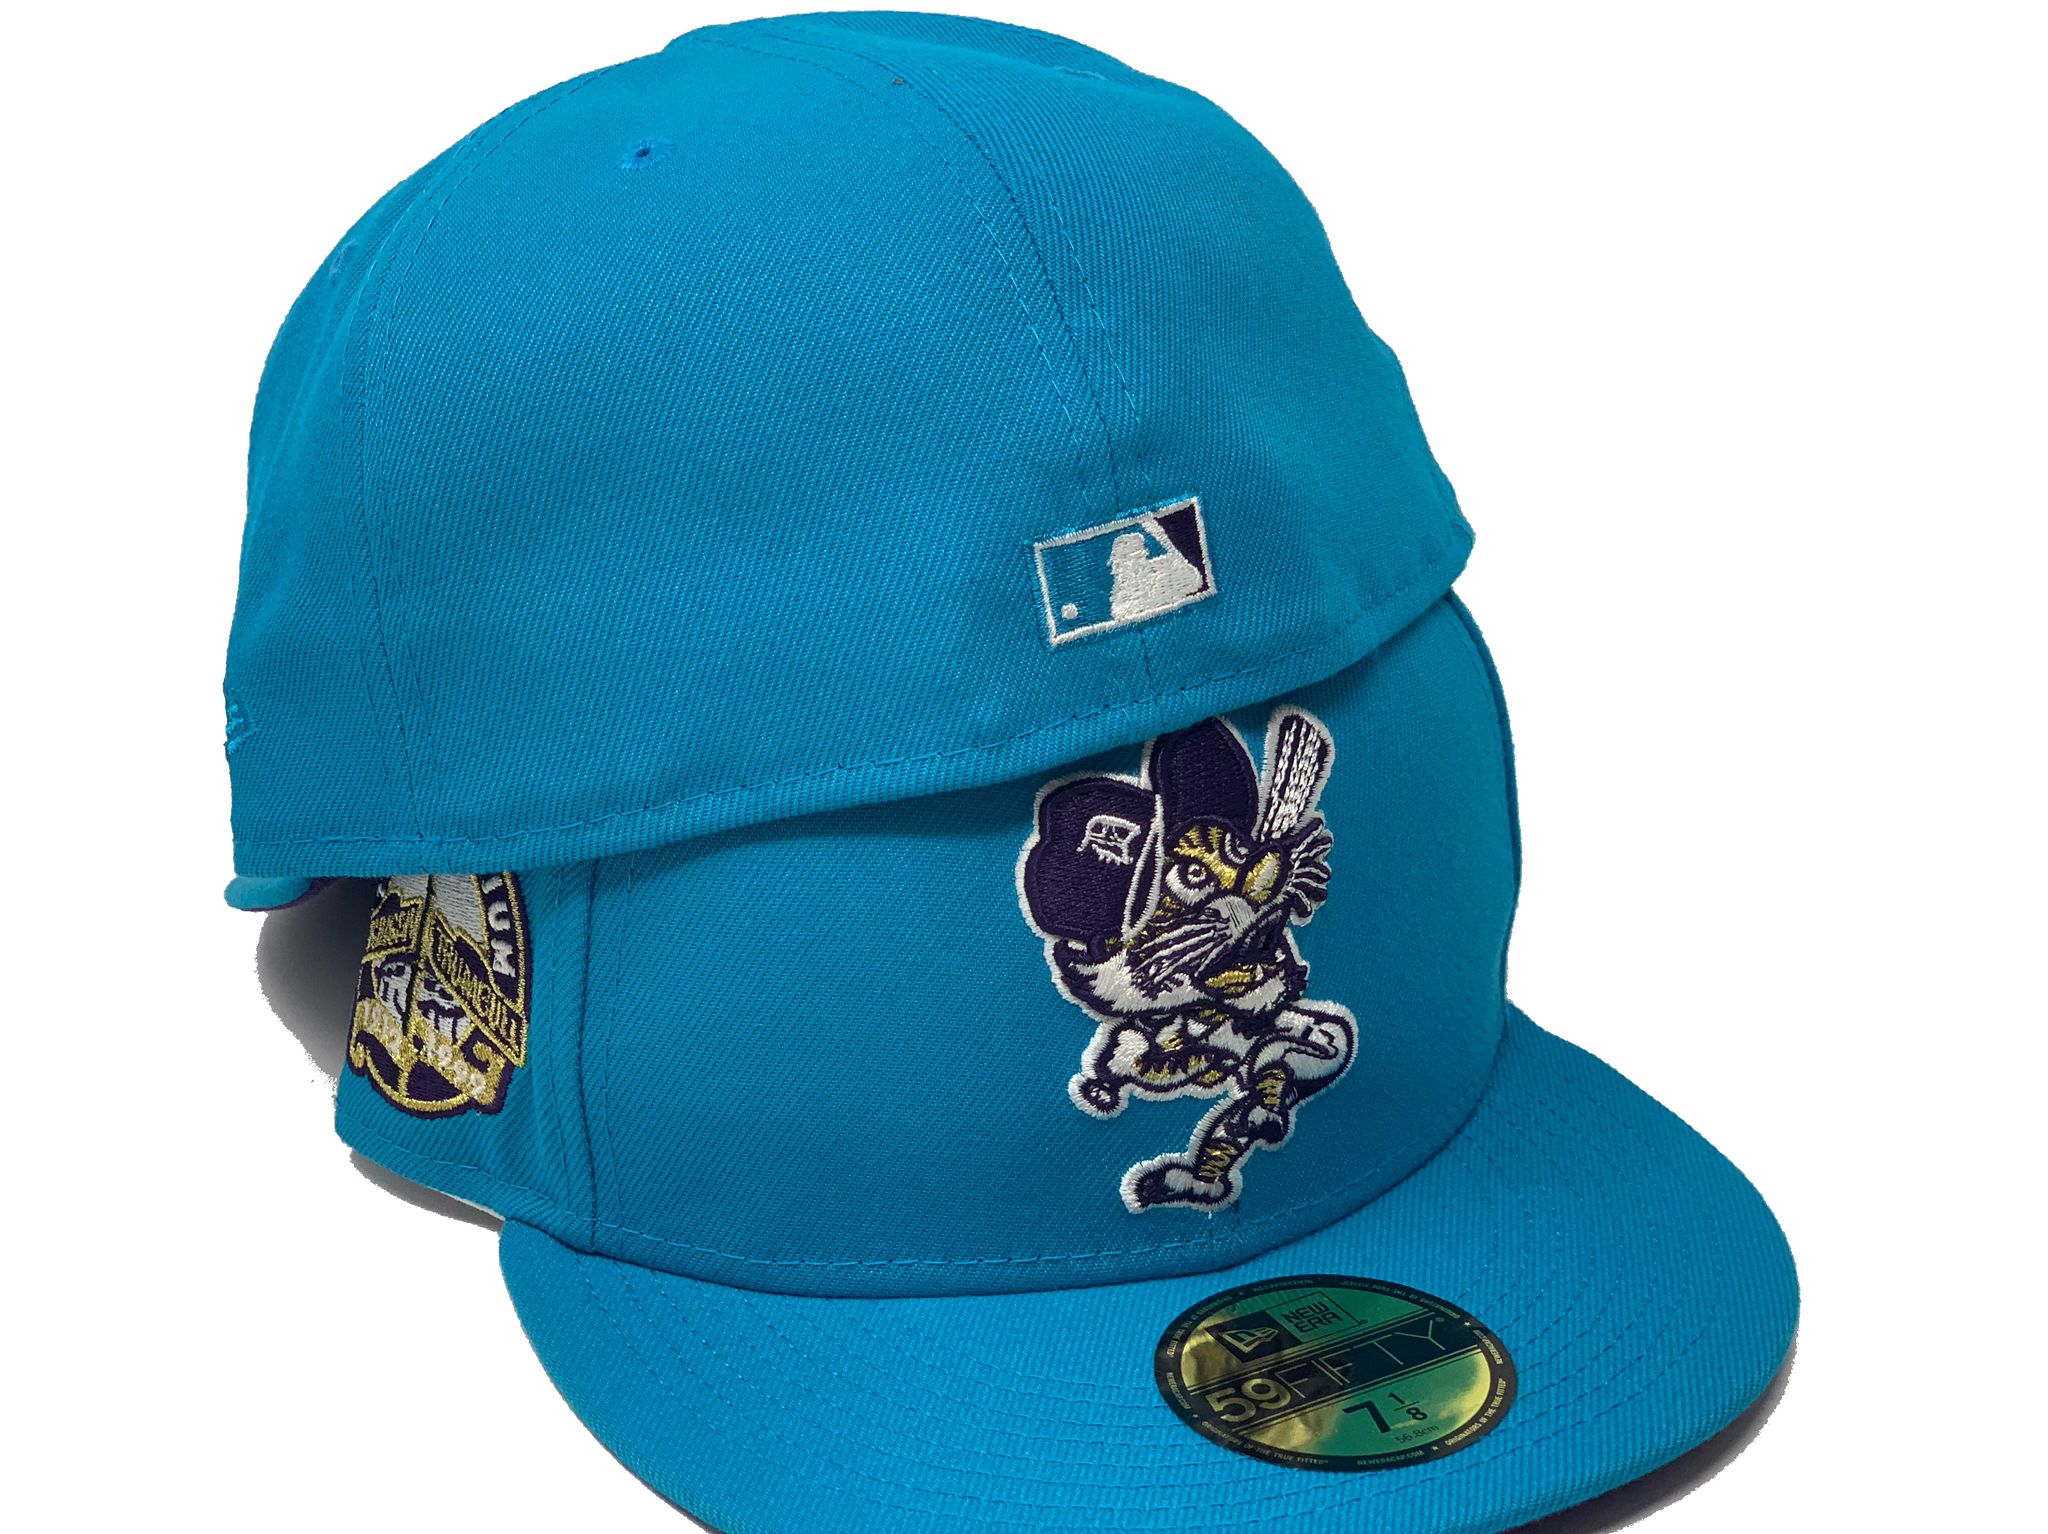 NEW ERA PURPLE LABEL DETROIT TIGERS FITTED HAT (GREEN/NAVY) – So